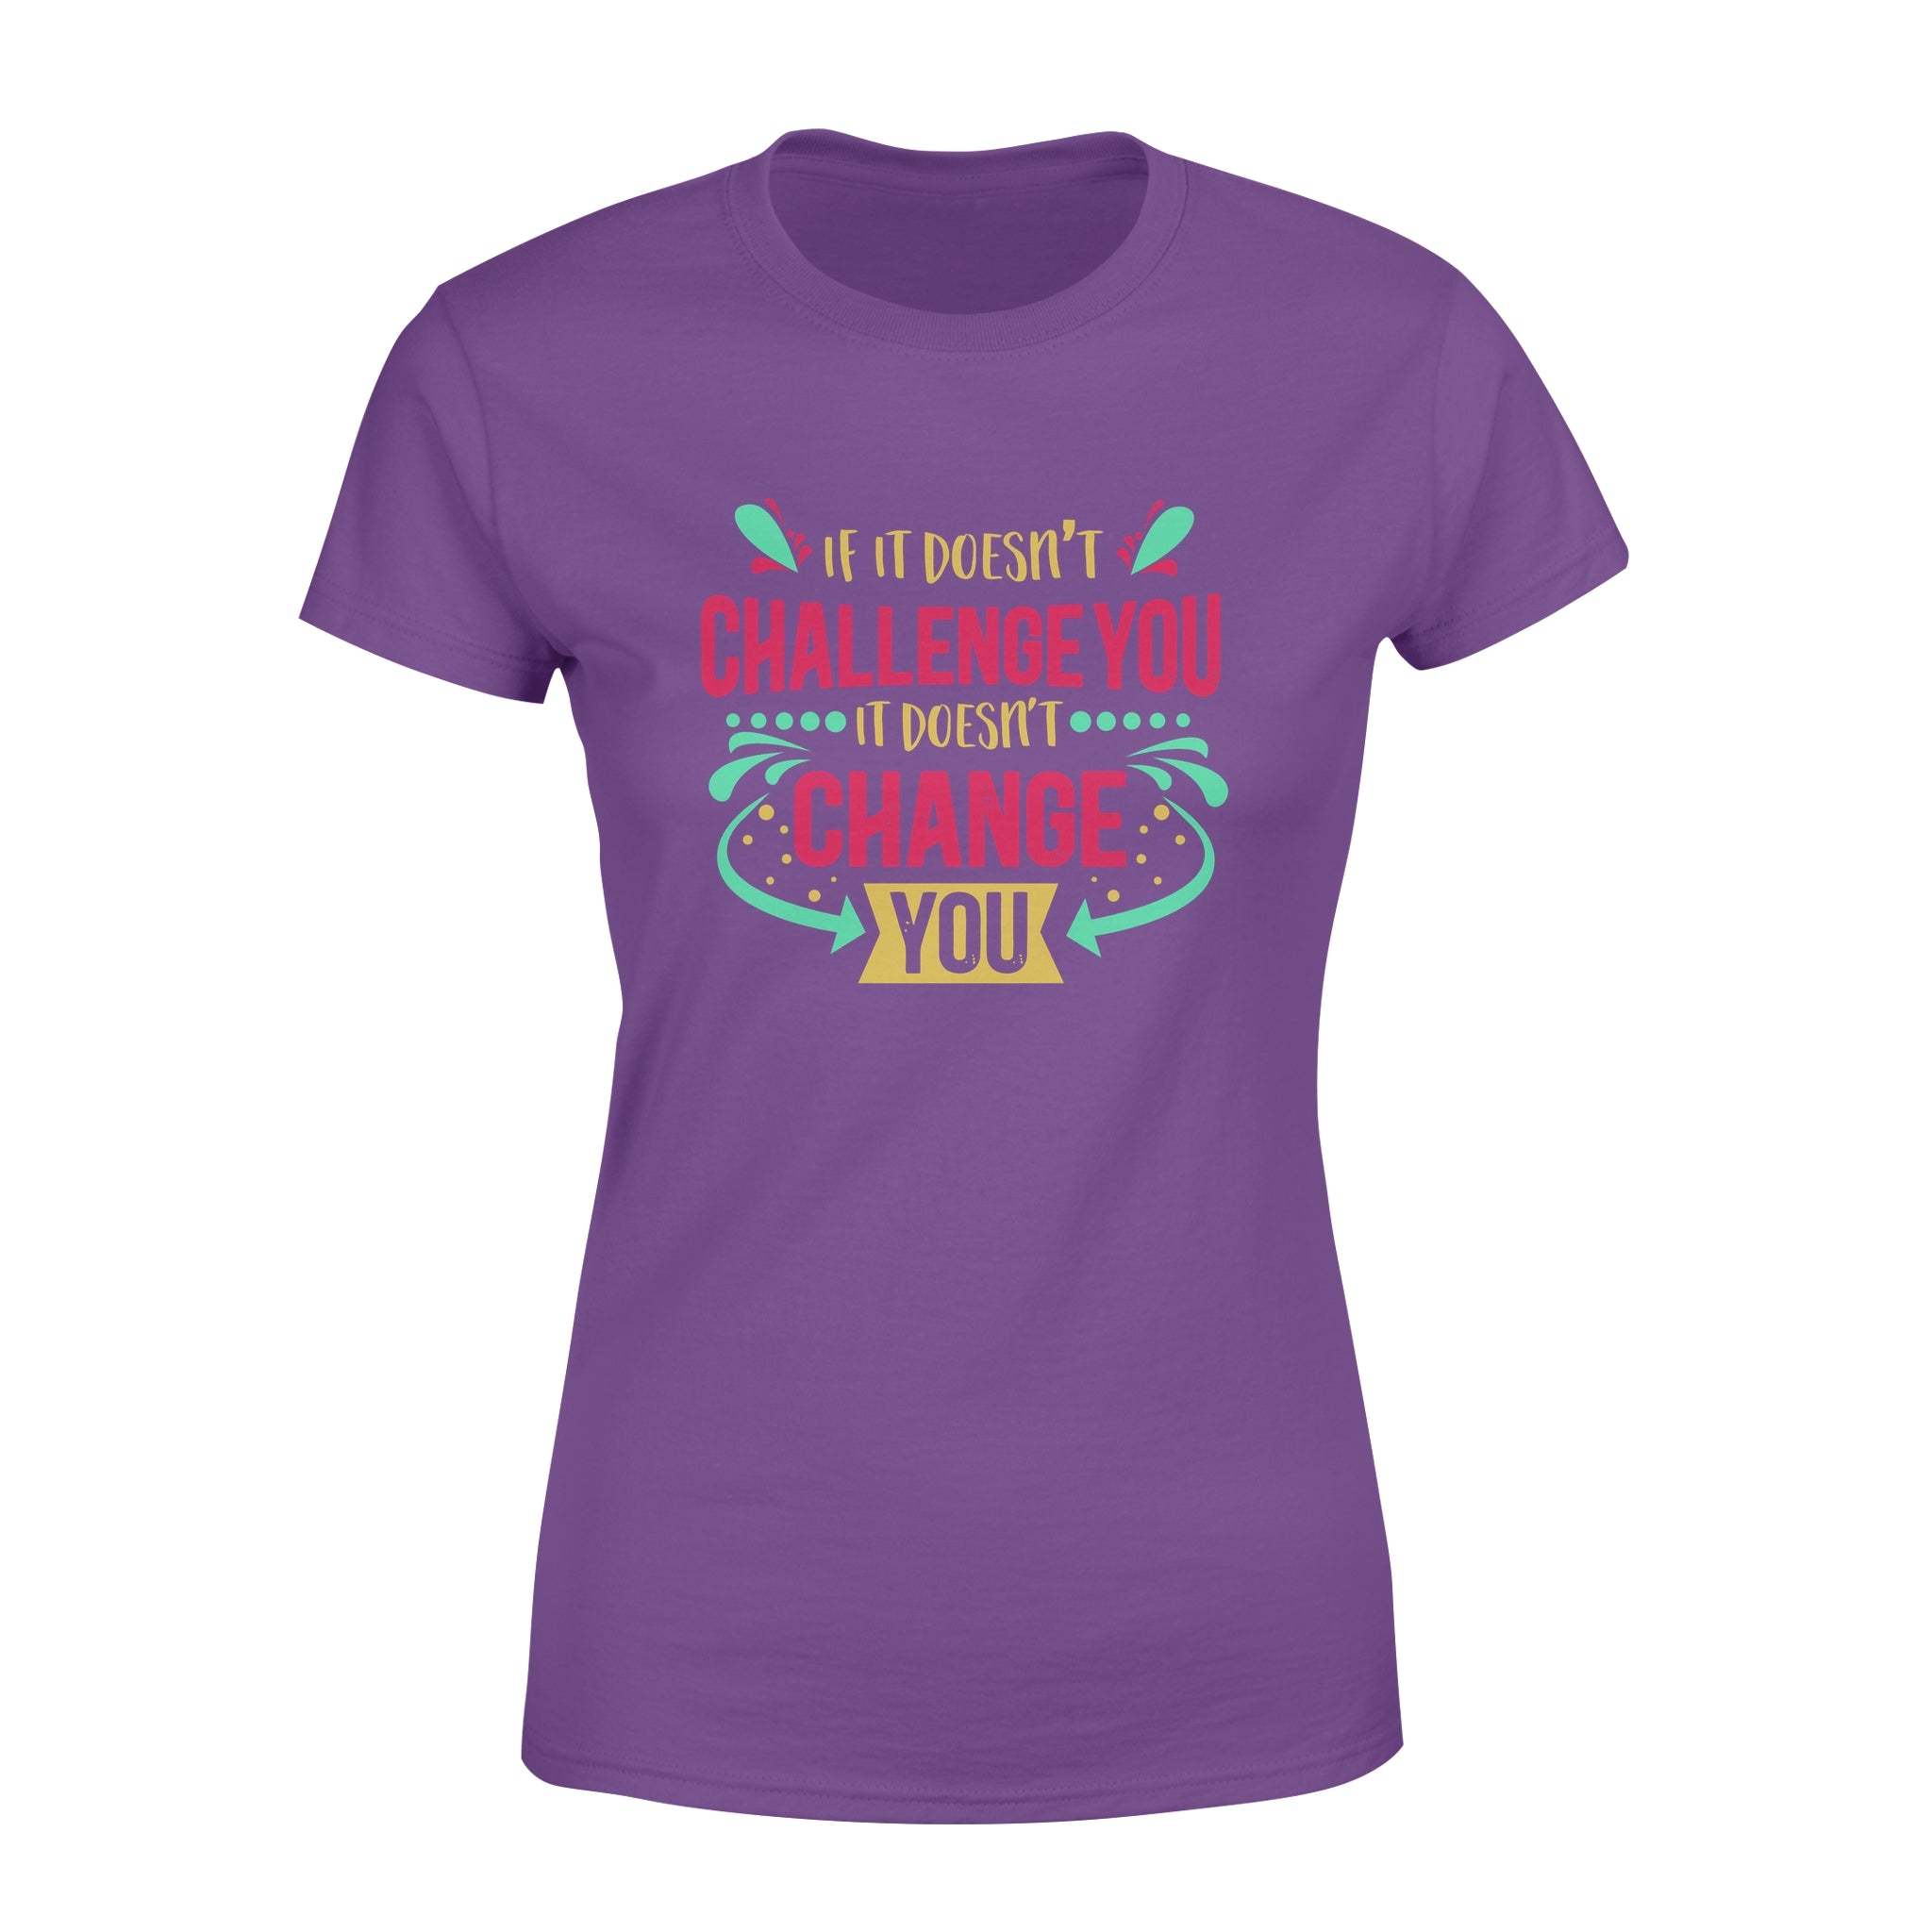 If It Doesn't Challenge You It Doesn't Change You -  Women's T-shirt